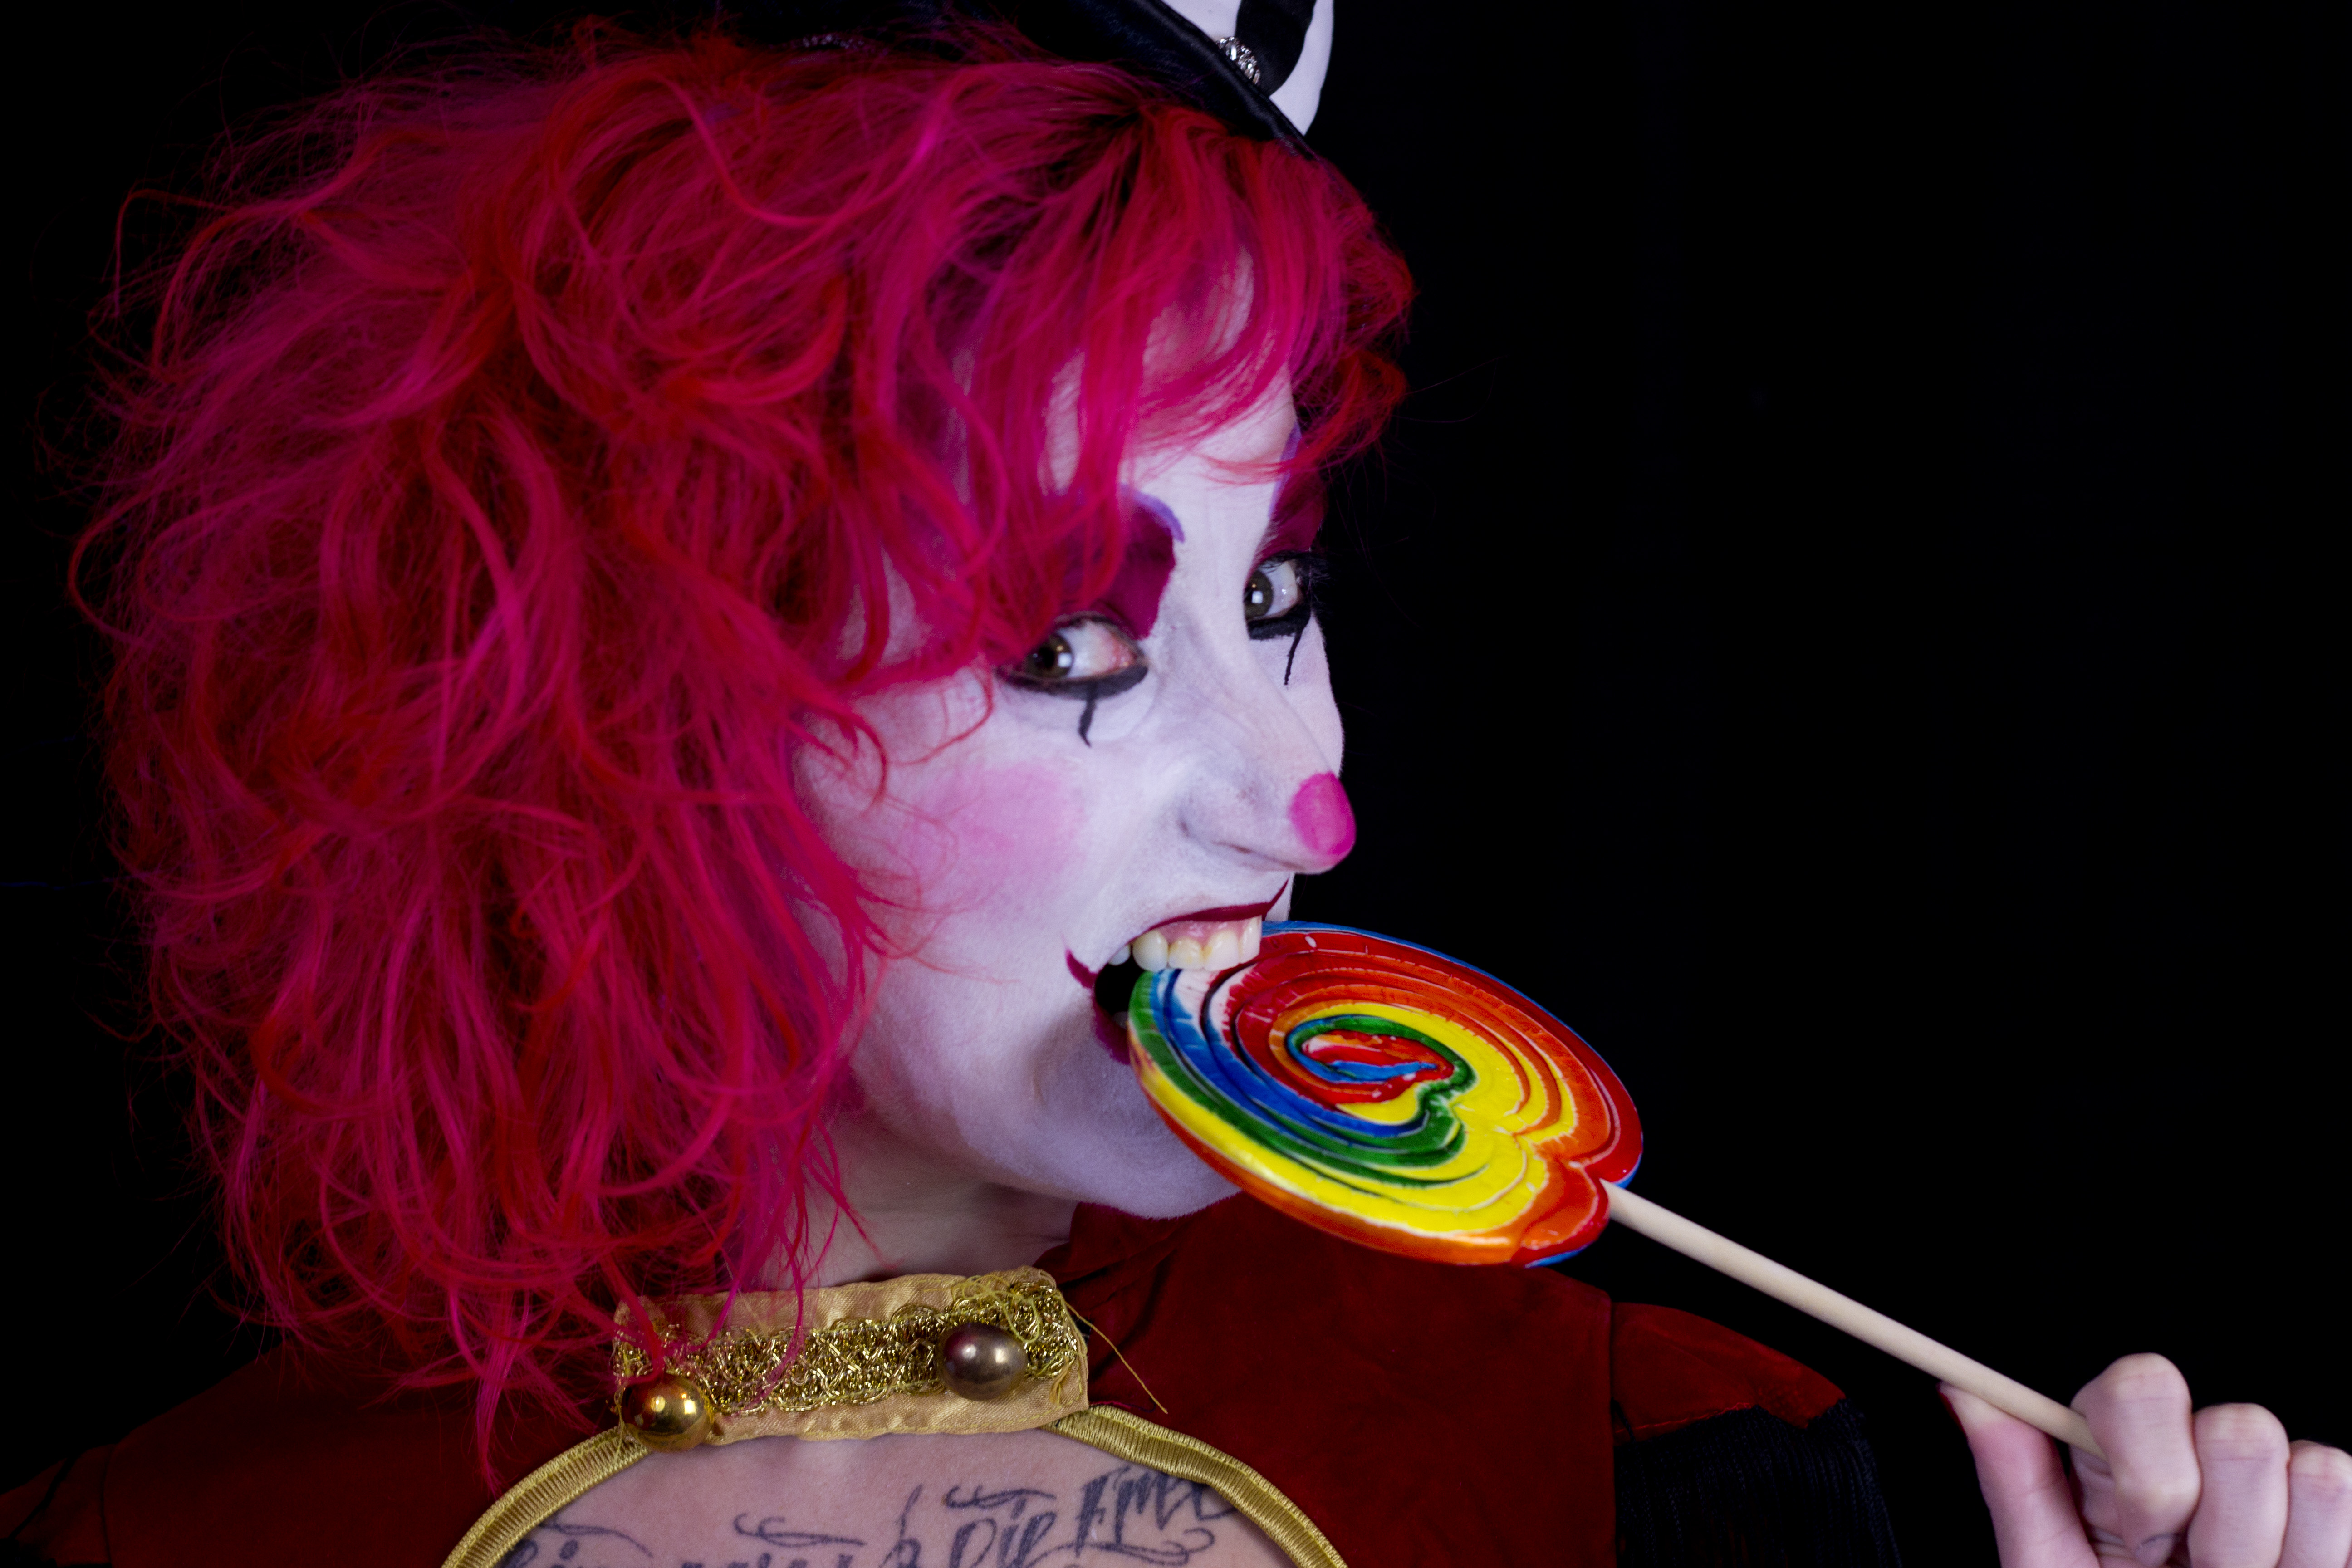 Adult Clown Porn - Inside the Kinky, Brightly Colored World of Clown Fetishists